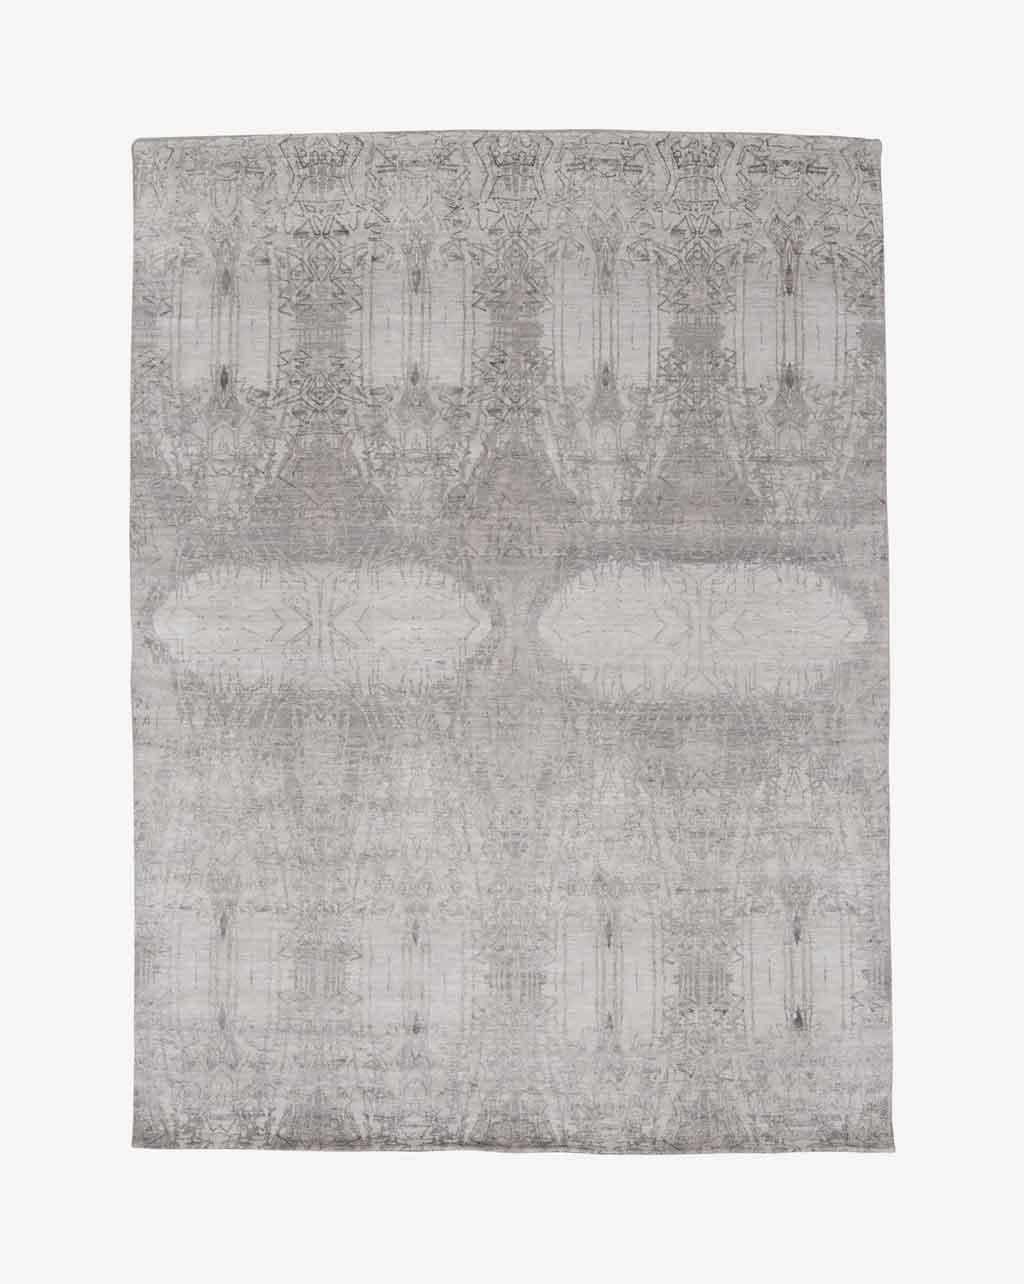 A Akimbo 1 Persian Knot Rug 10' x 14'||Greyscale with an abstract geometric design on it.